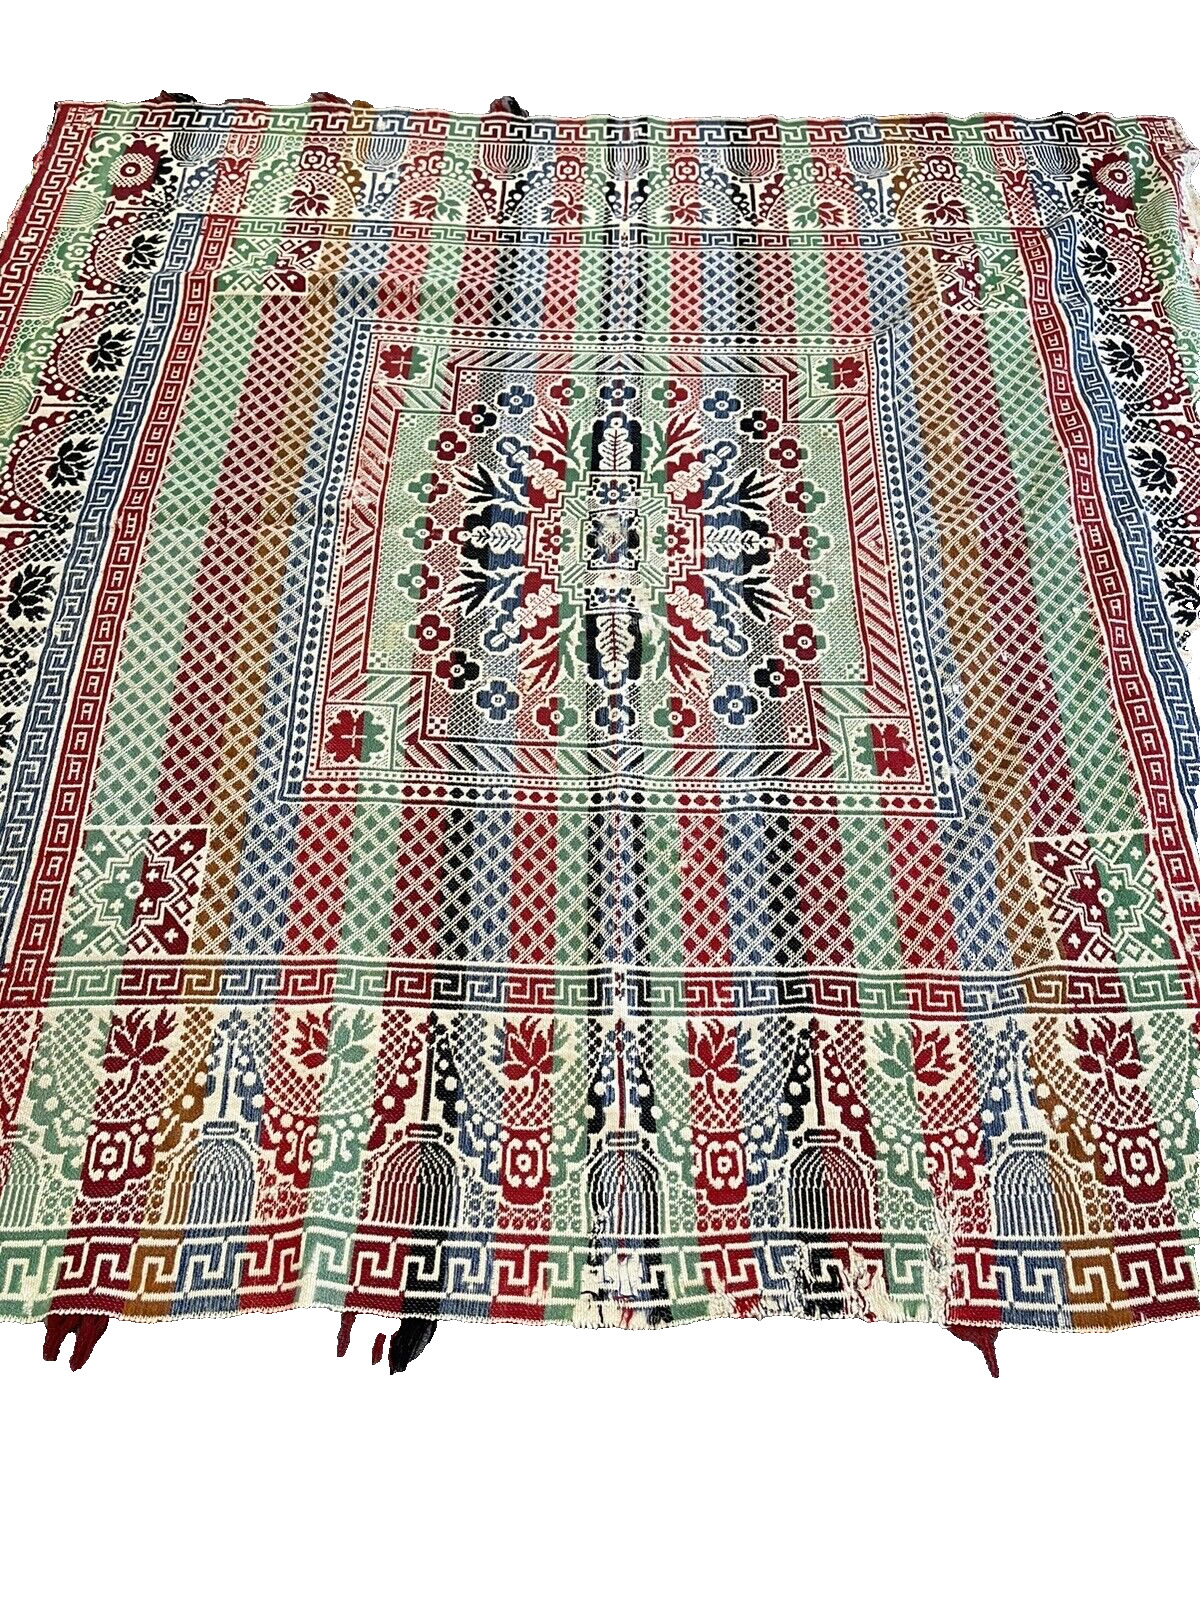 Antique Appalachian Southern Handmade Woven Coverlet  approx 76” x 76”